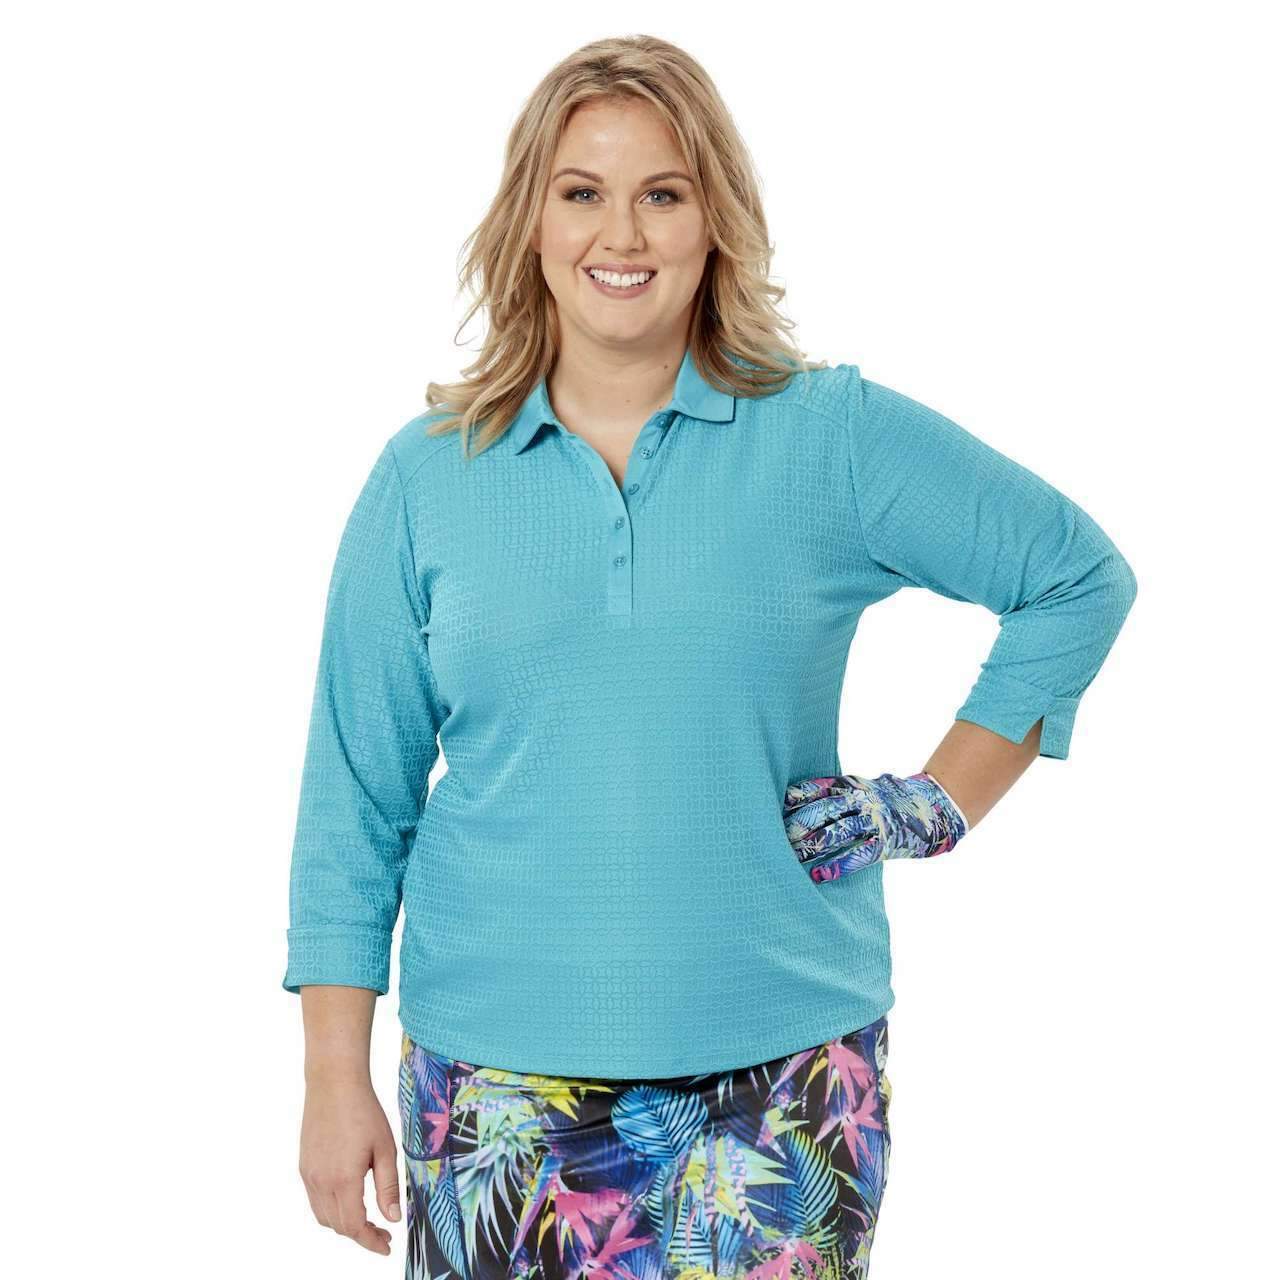 Women's Golf Shorts & Plus Sized Clothing for Less!